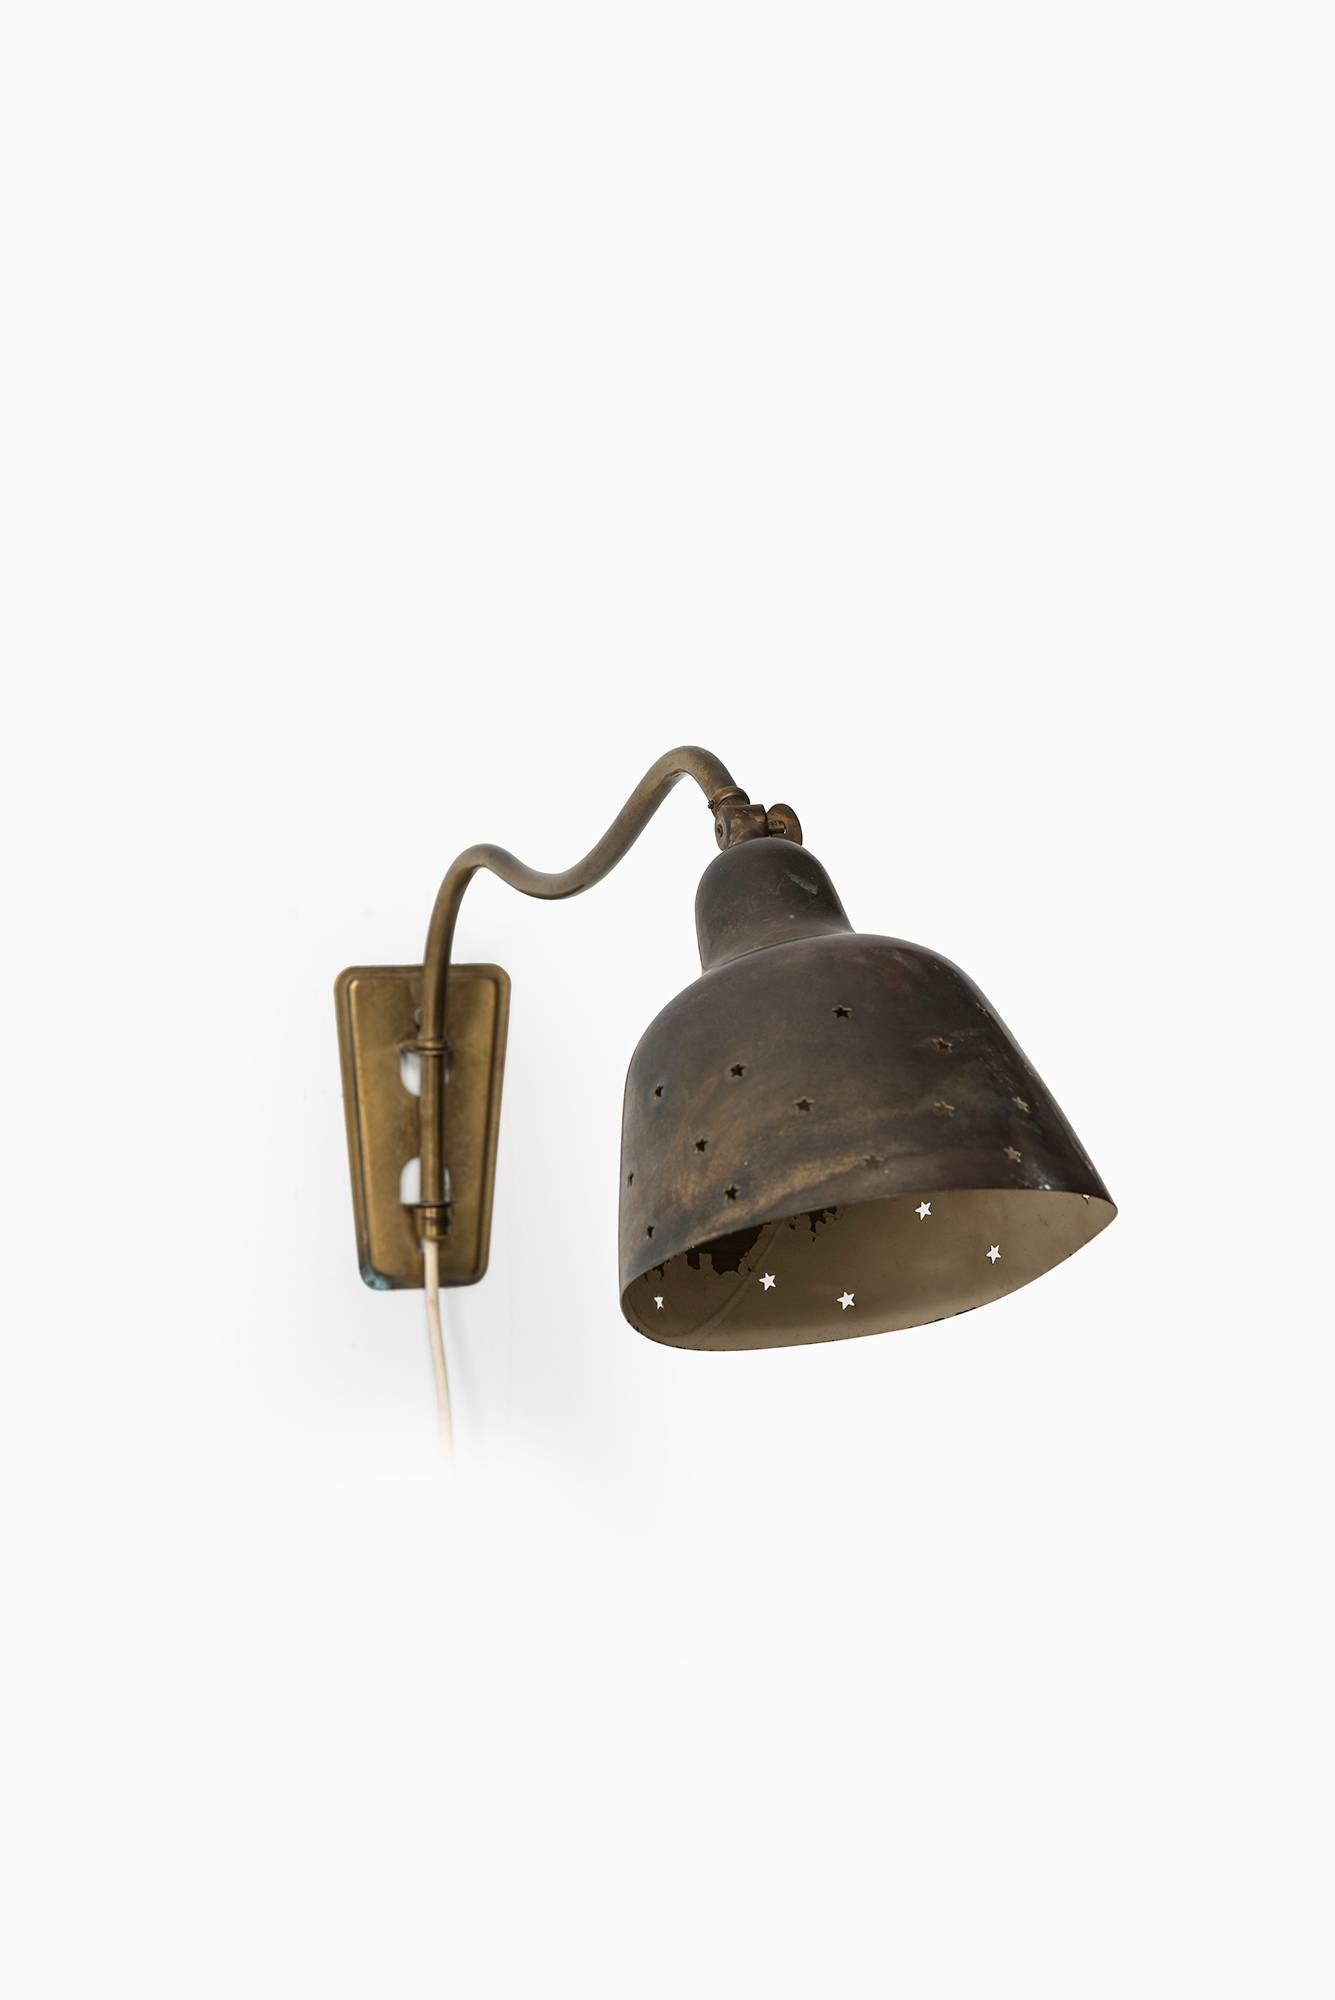 Danish Wall Lamp in the Manner of Vilhelm Lauritzen and Produced in Denmark